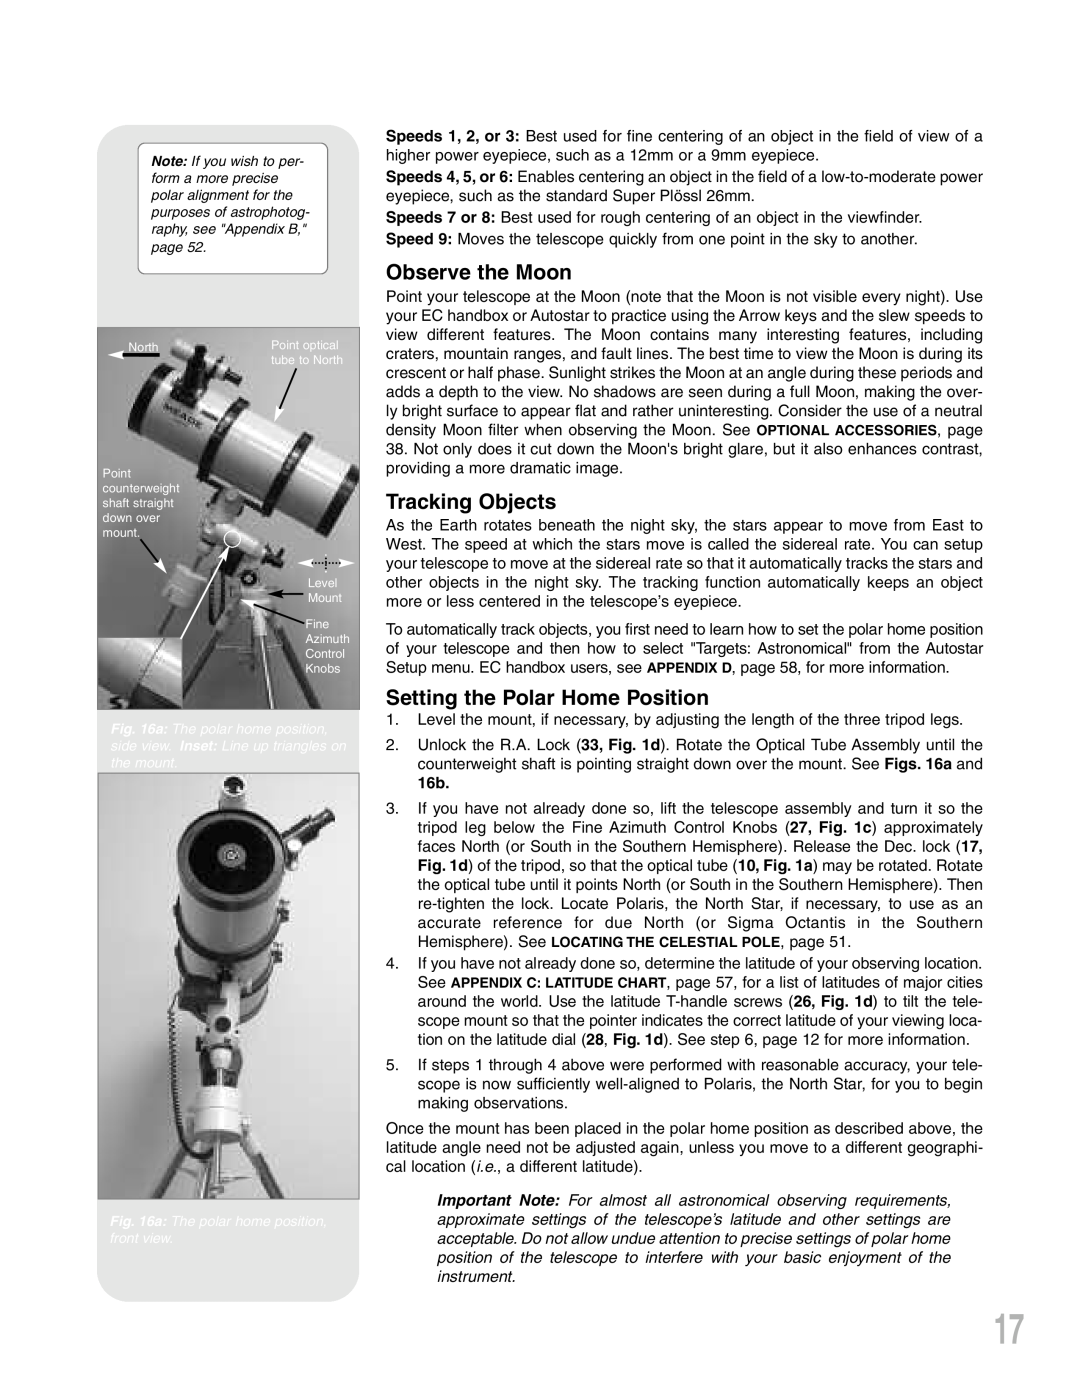 Meade LXD75 instruction manual Observe the Moon, Tracking Objects, Setting the Polar Home Position 